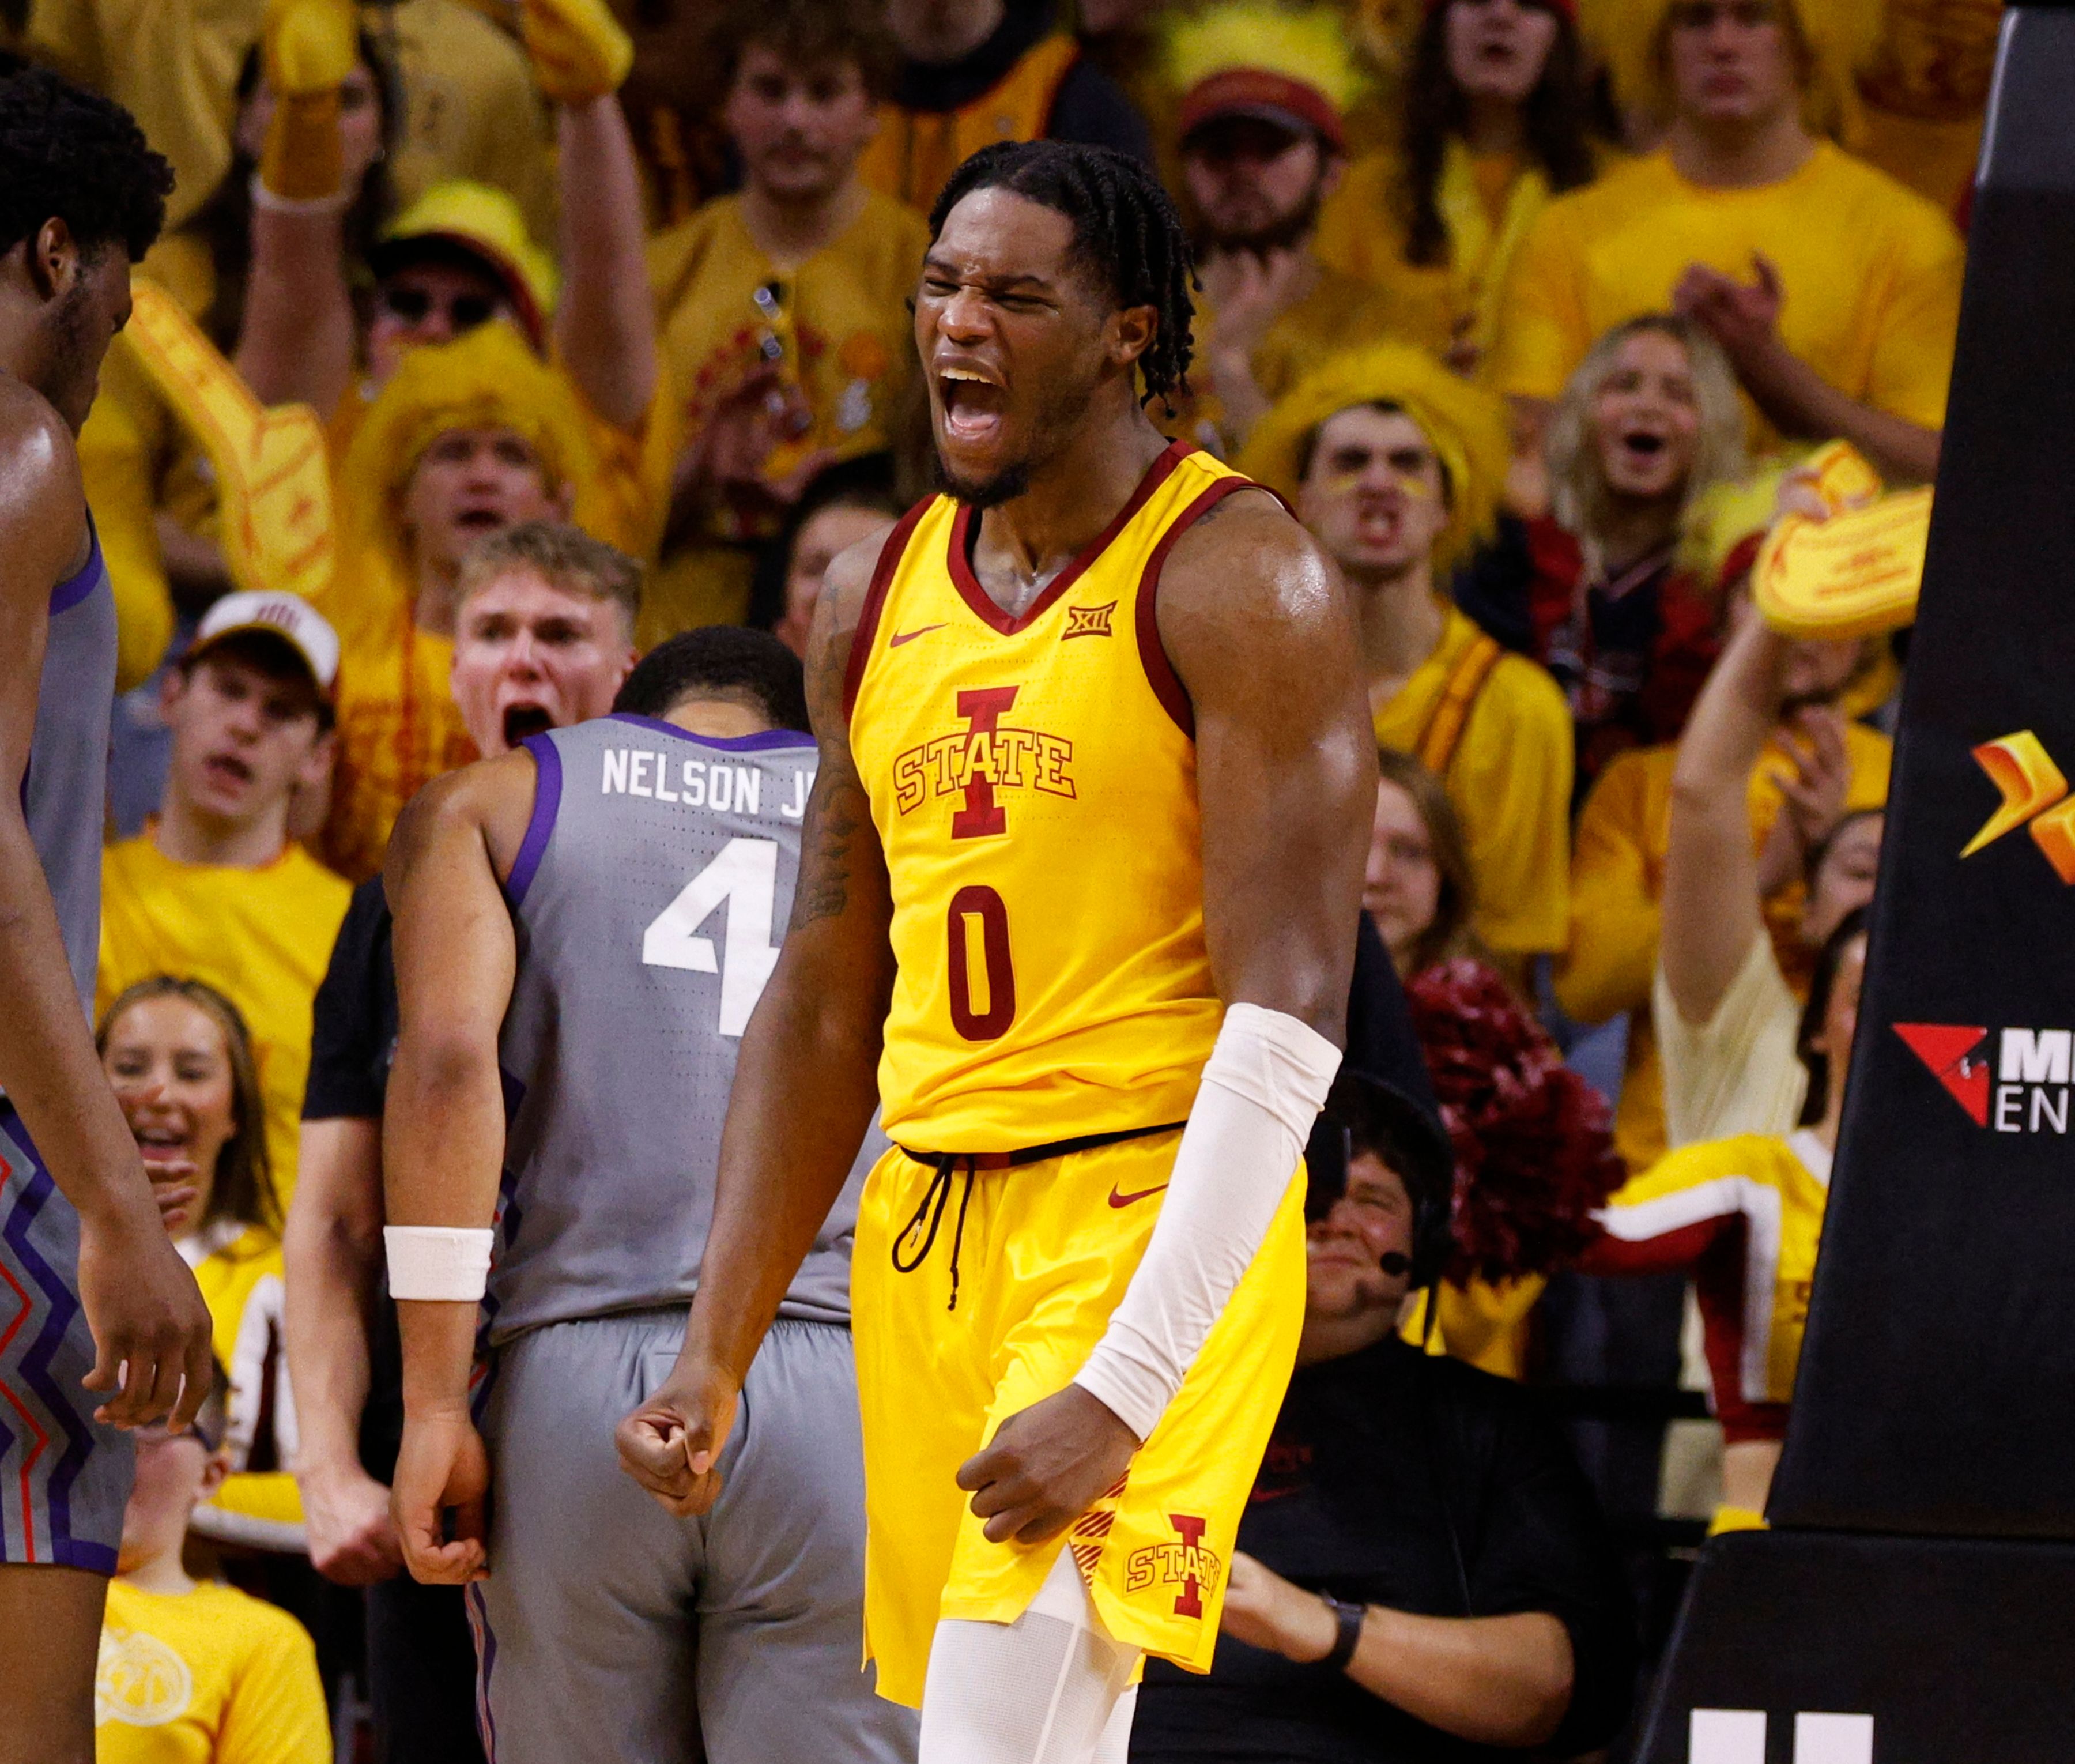 AMES, IA - FEBRUARY 10: Tre King #0 of the Iowa State Cyclones reacts after scoring a basket as Jameer Nelson Jr. #4 of the TCU Horned Frogs watches on in the second half of play at Hilton Coliseum on February 10, 2024 in Ames, Iowa. The Iowa State Cyclones won 71-59 over the TCU Horned Frogs.   David Purdy/Getty Images/AFP (Photo by David Purdy / GETTY IMAGES NORTH AMERICA / Getty Images via AFP)